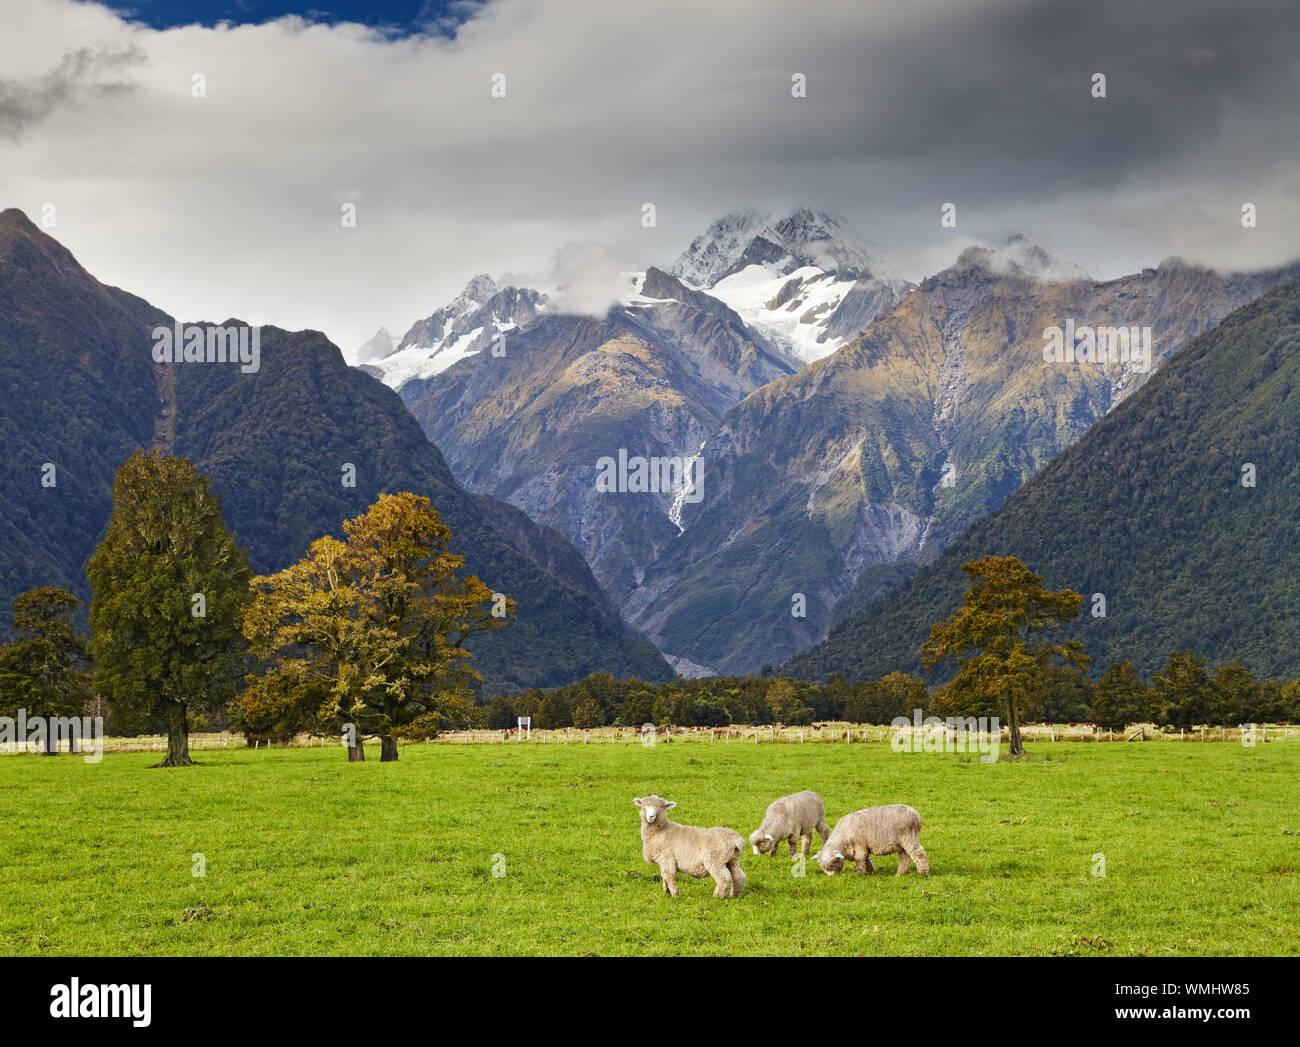 Landscape with snowy mountains and grazing sheep, Fox Glacier view, Southern Alps, New Zealand Stock Photo